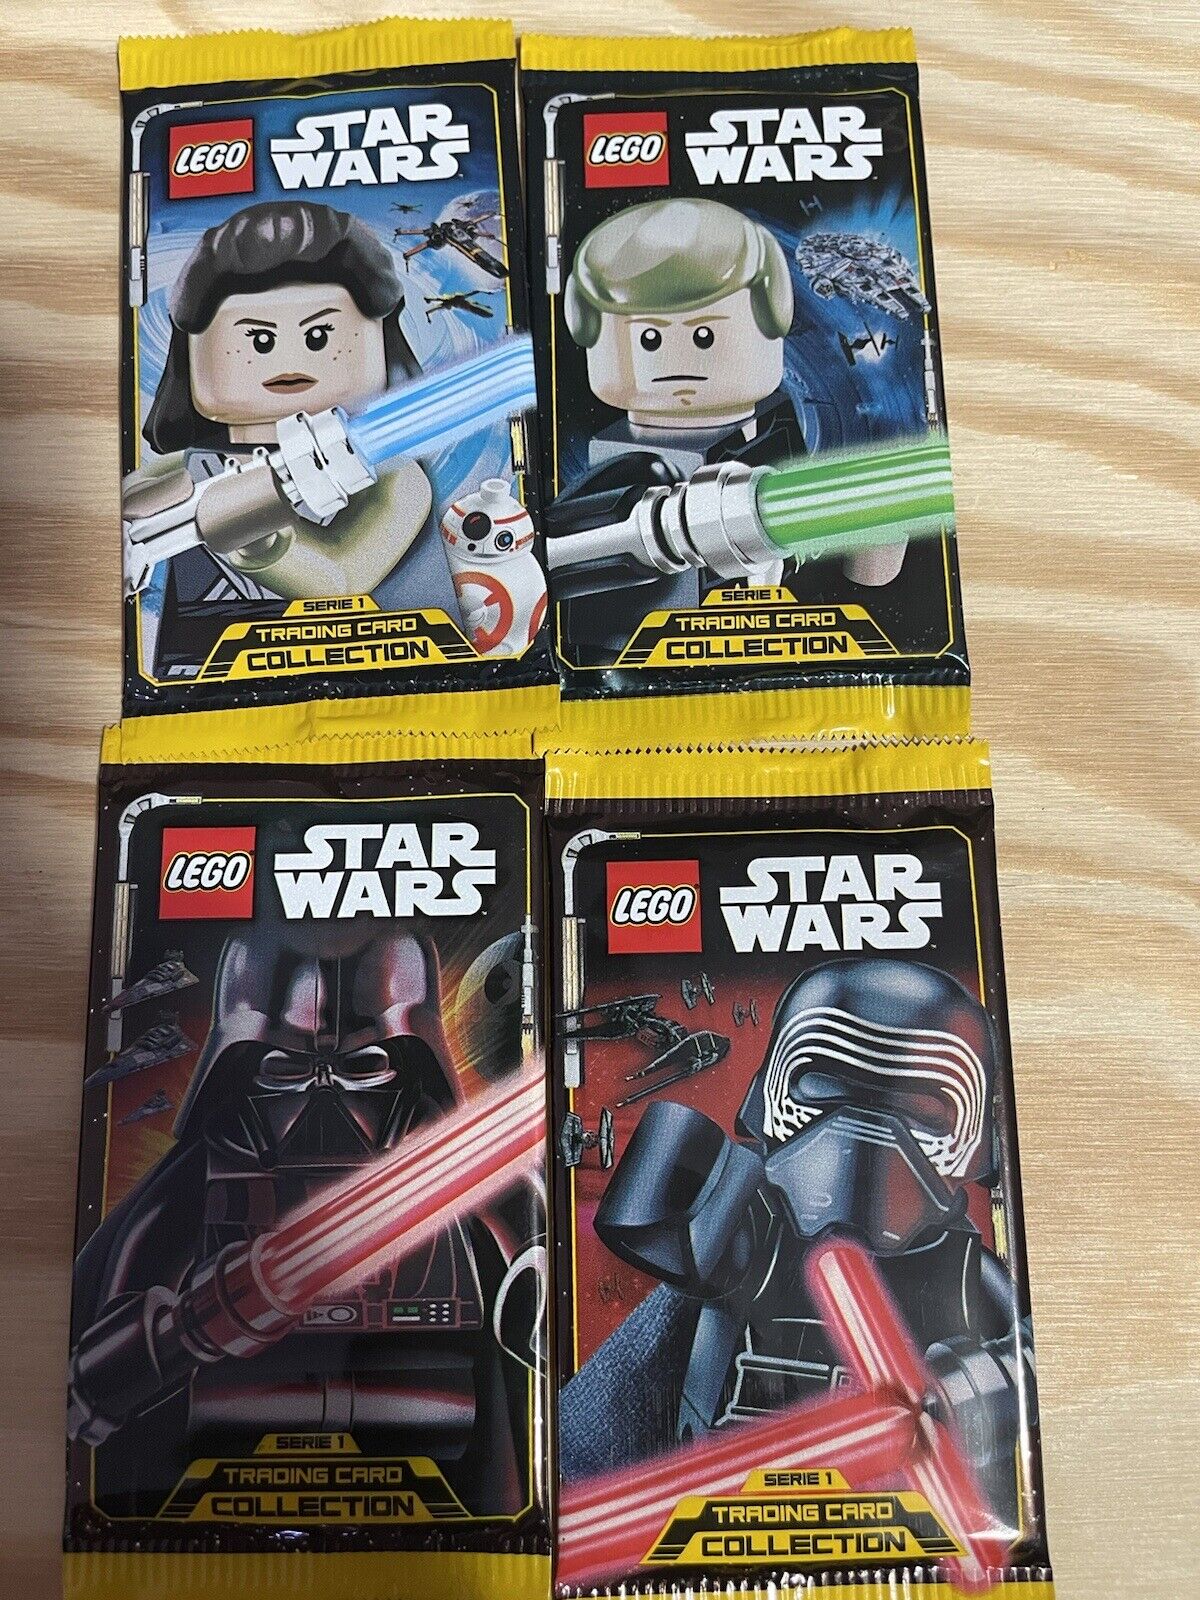 Lego Star Wars Series 1 Trading Cards 4 packs